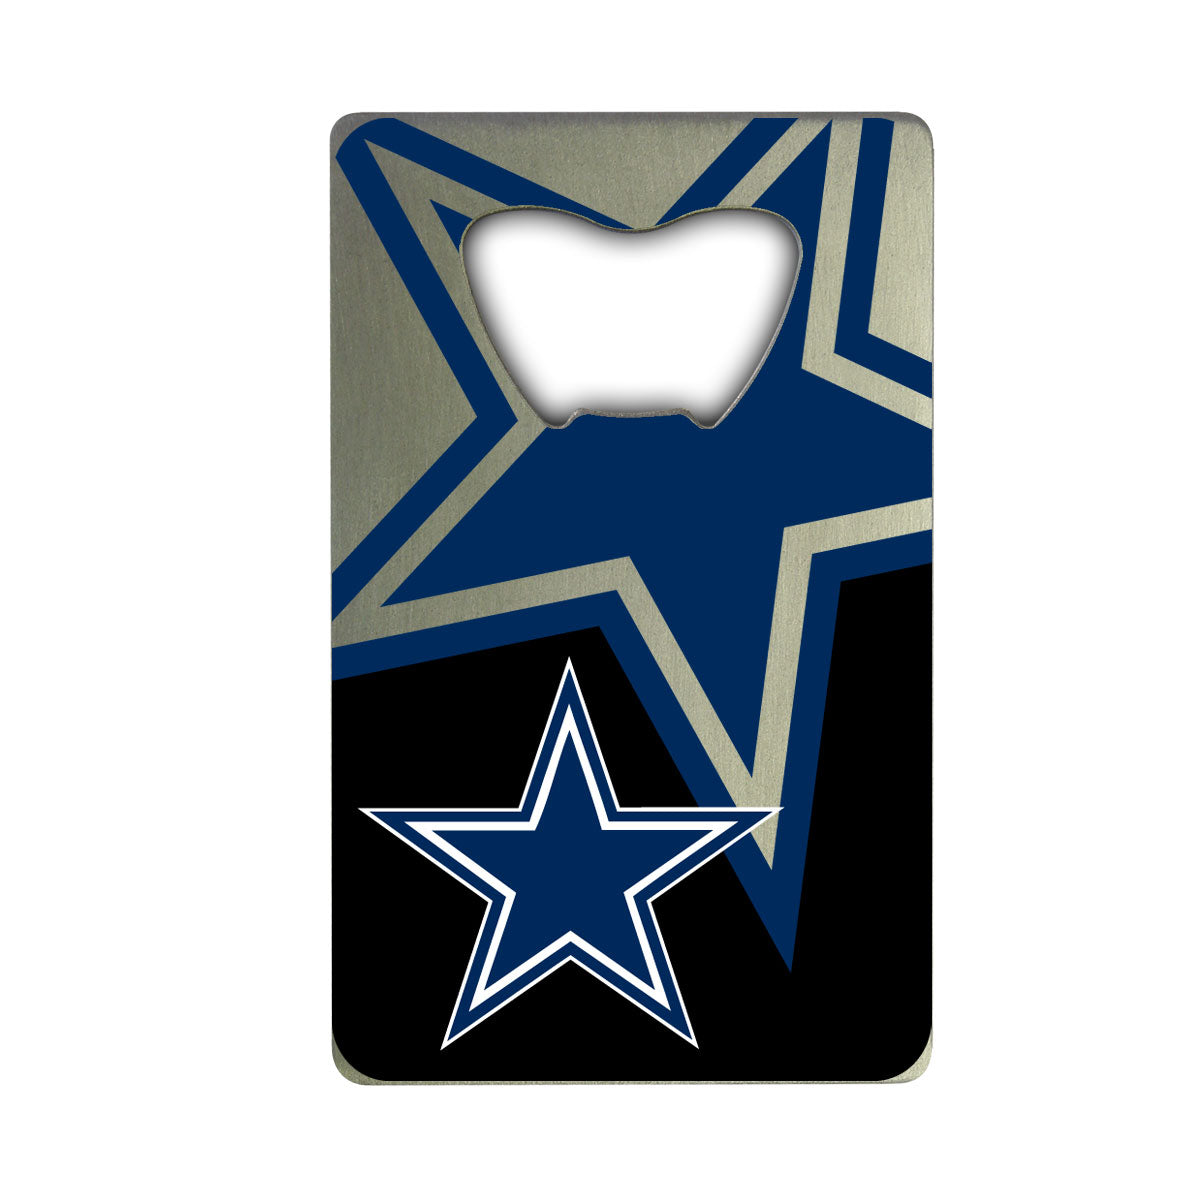 Dallas Cowboys Credit Card Style Bottle Opener - 2” x 3.25